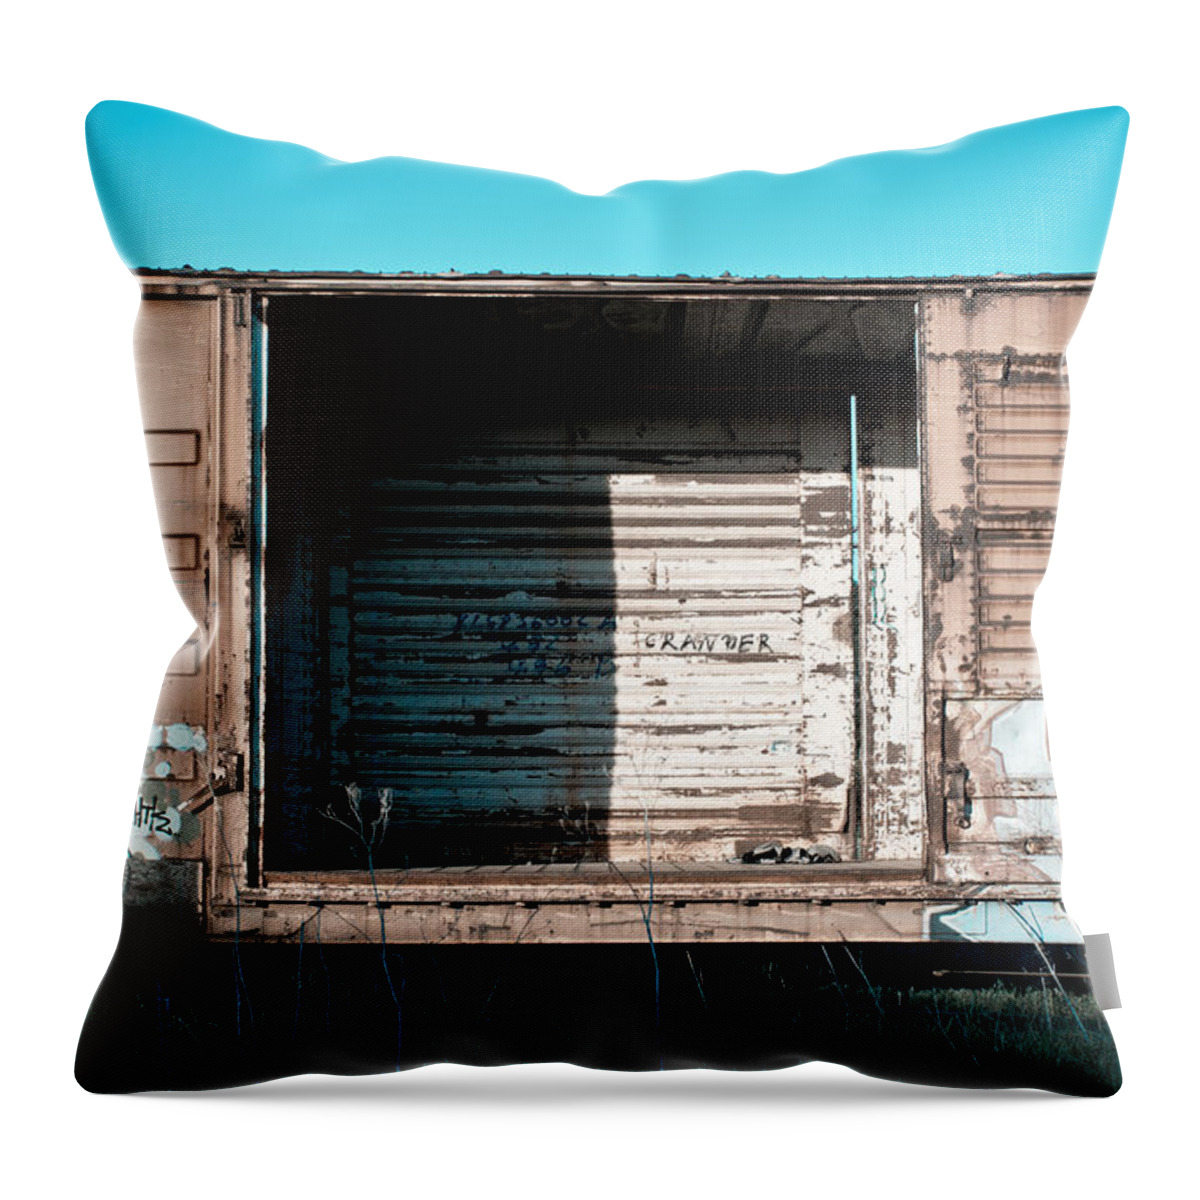 Train Throw Pillow featuring the photograph Trains 15 by Niels Nielsen